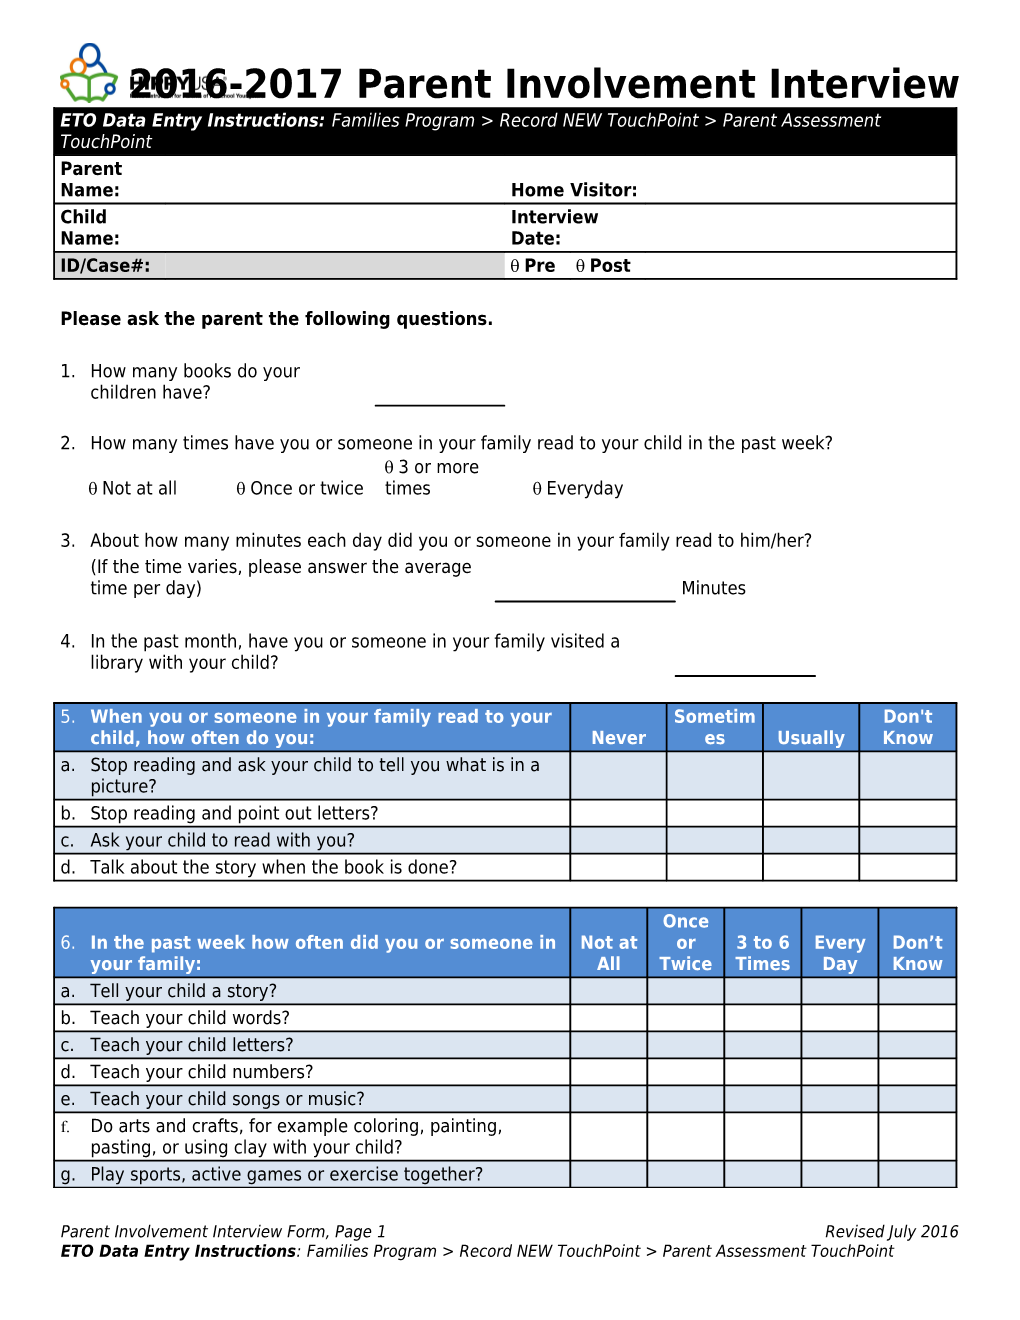 Parent Involvement Interview Form, Page 1 Revised July 2016